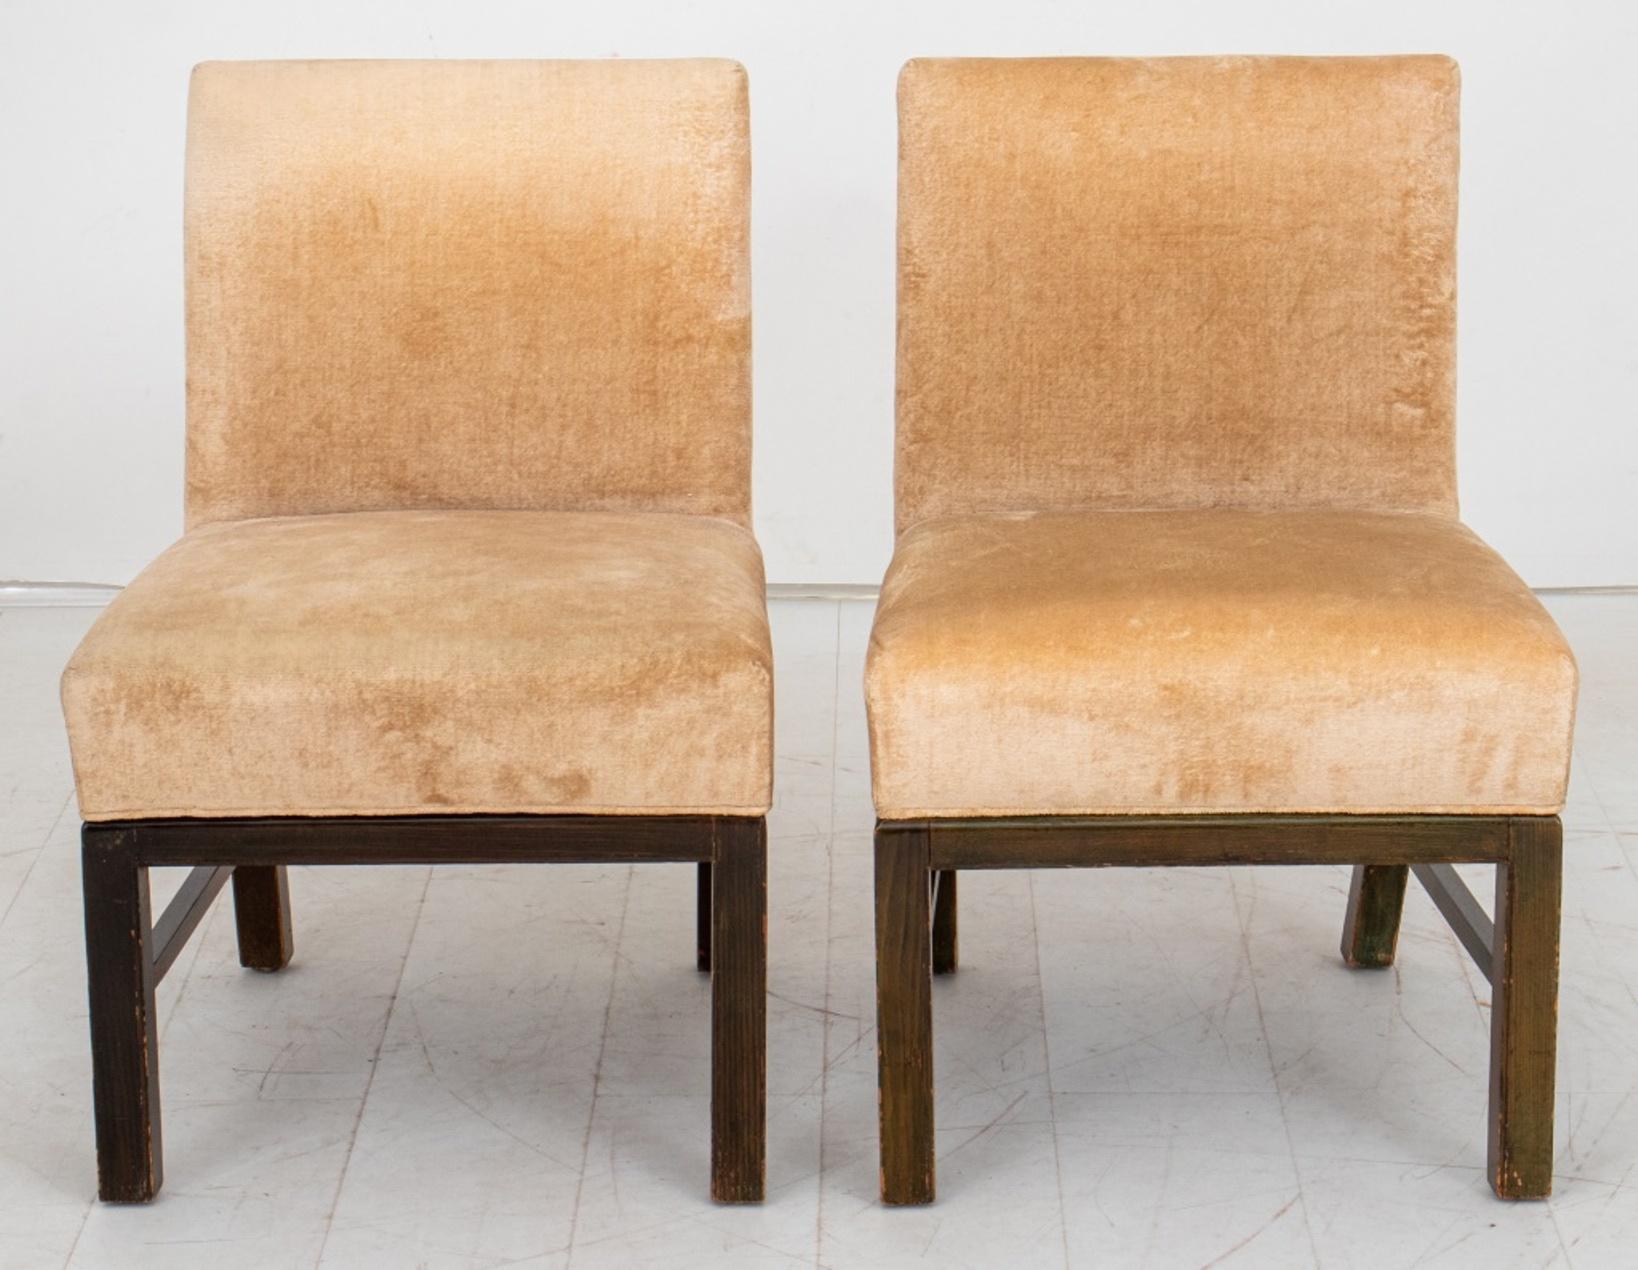 Velvet Upholstered slipper chairs with square backs and seats, each on square wooden legs, joined by stretchers. Provenance: Acquired through Thad Hayes
Provenance: Property From a Thad Hayes Designed Apartment Featured in Architectural Digest,